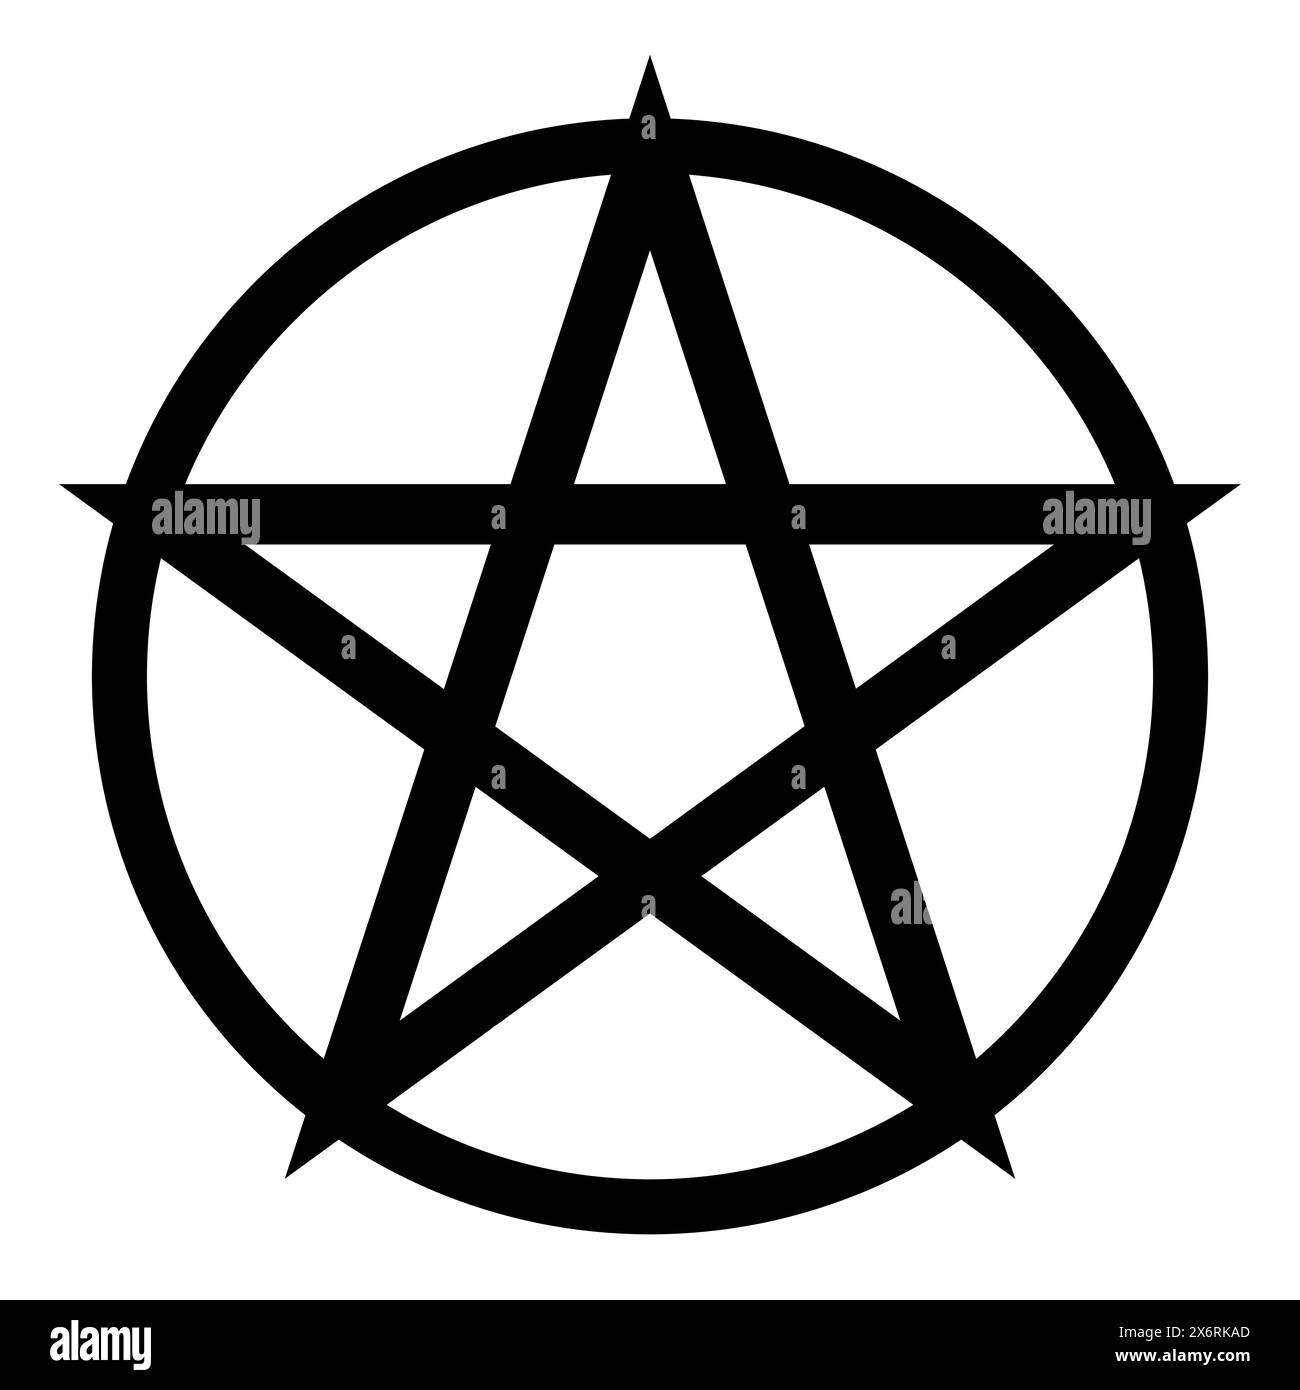 Pentacle symbol - vector illustration of simple five-pointed star in circle, isolated on white Stock Vector